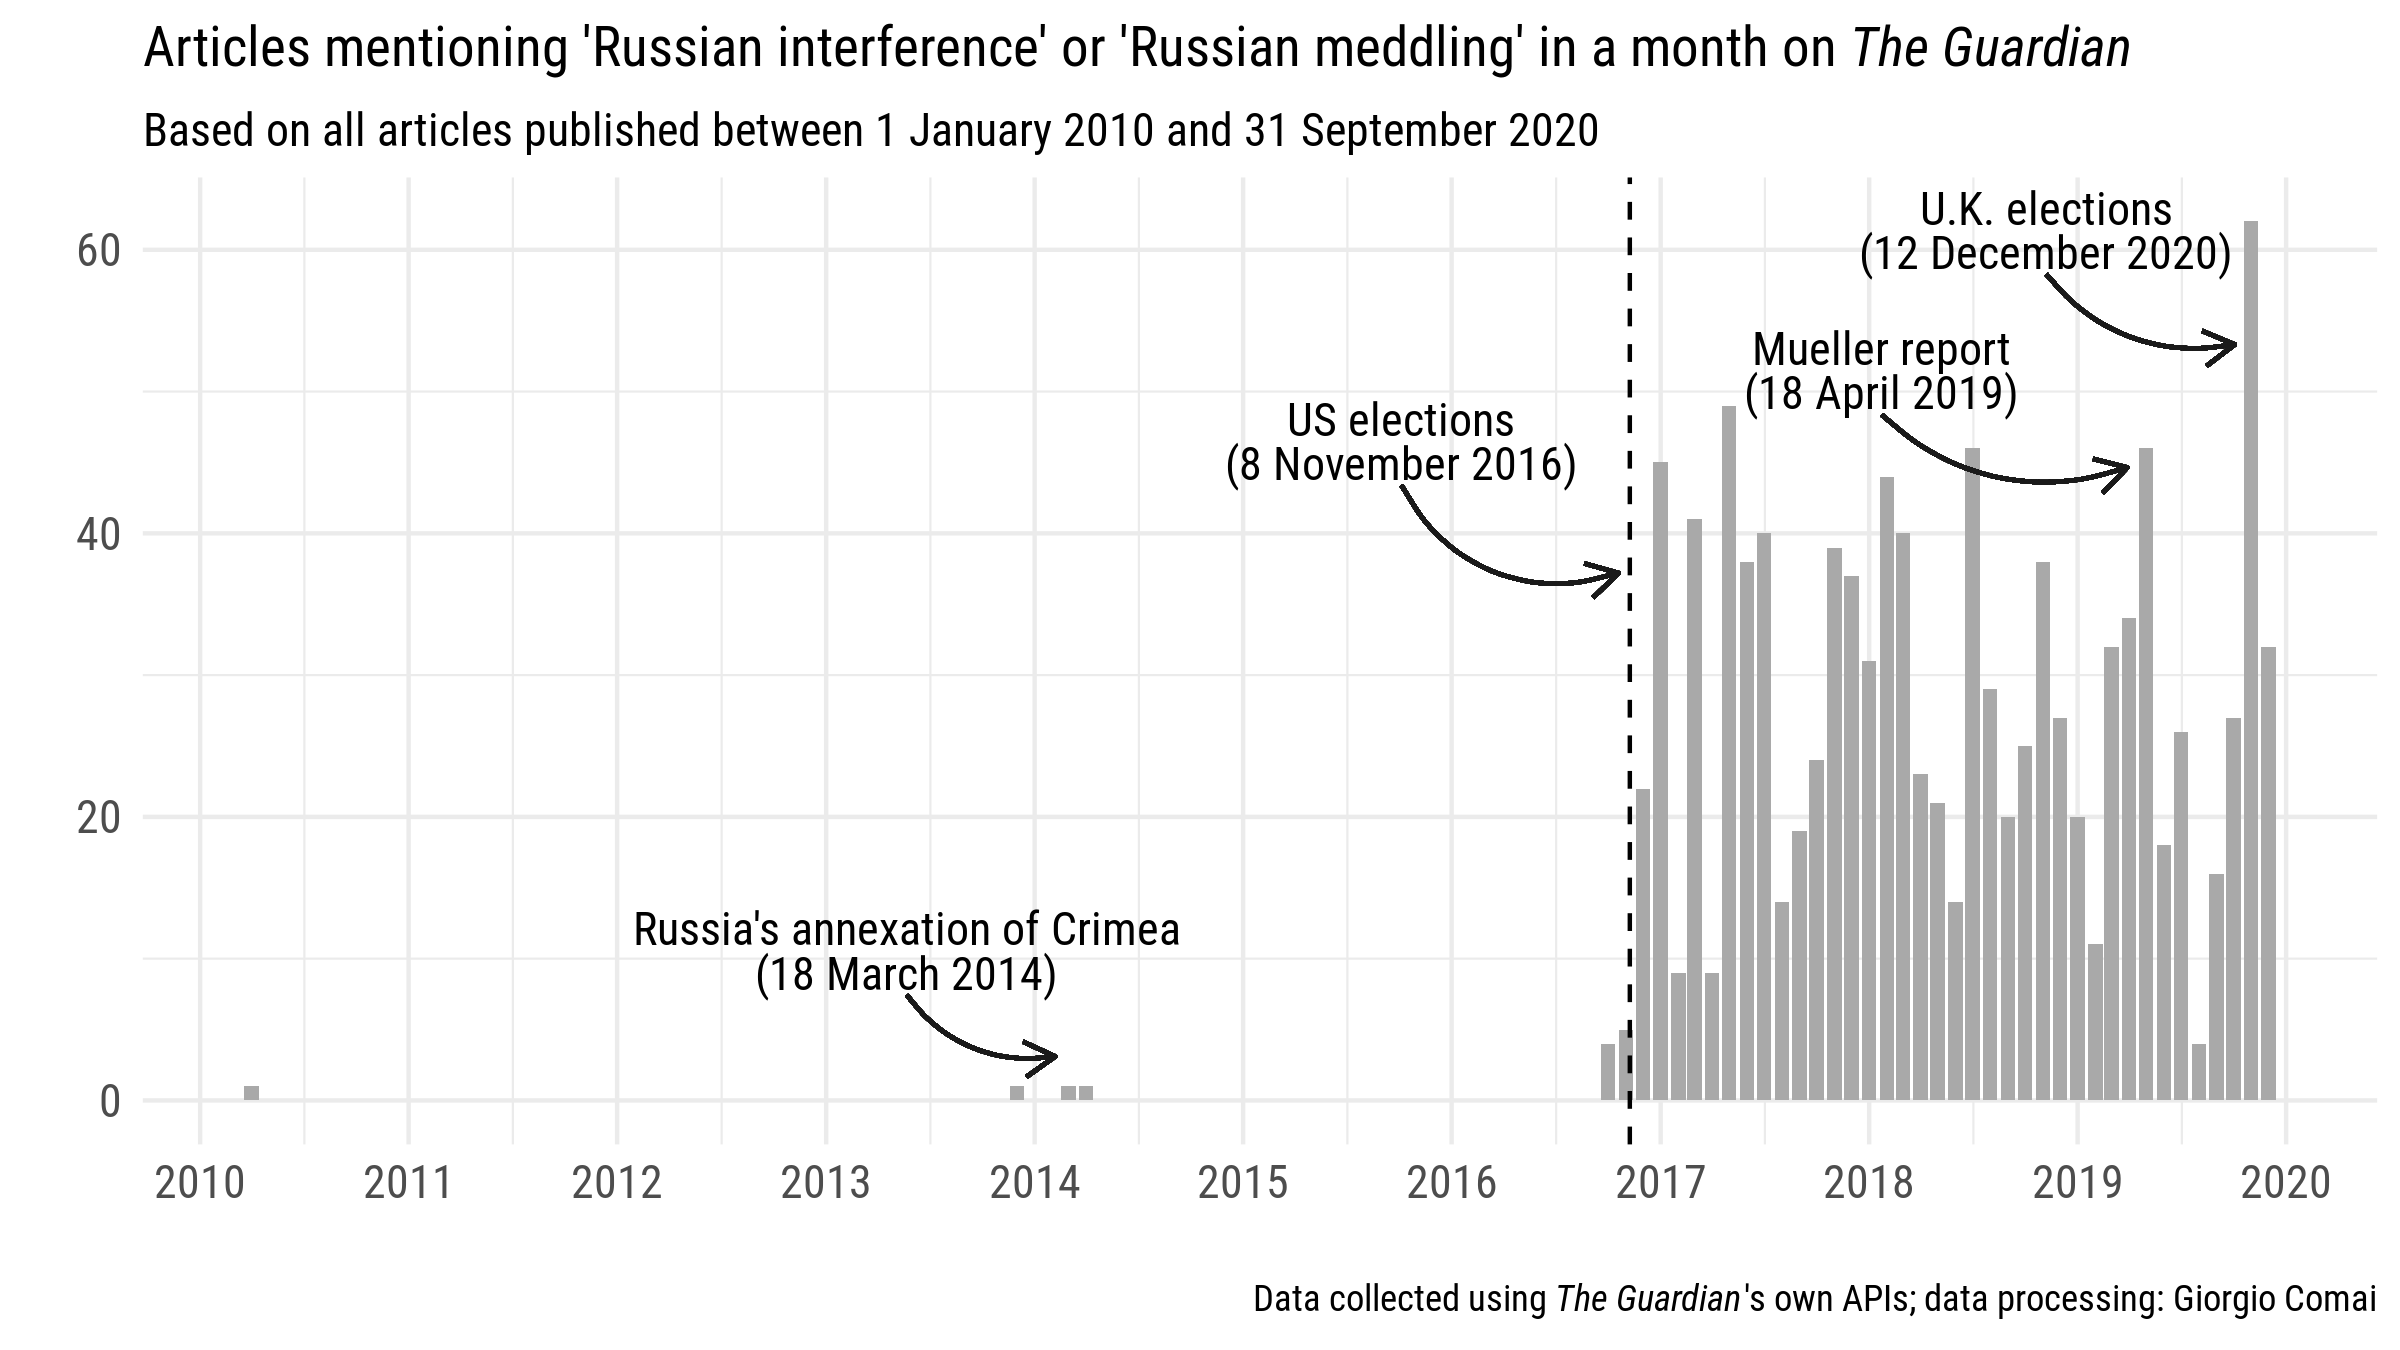 Mentions of Russian interference in The Guardian